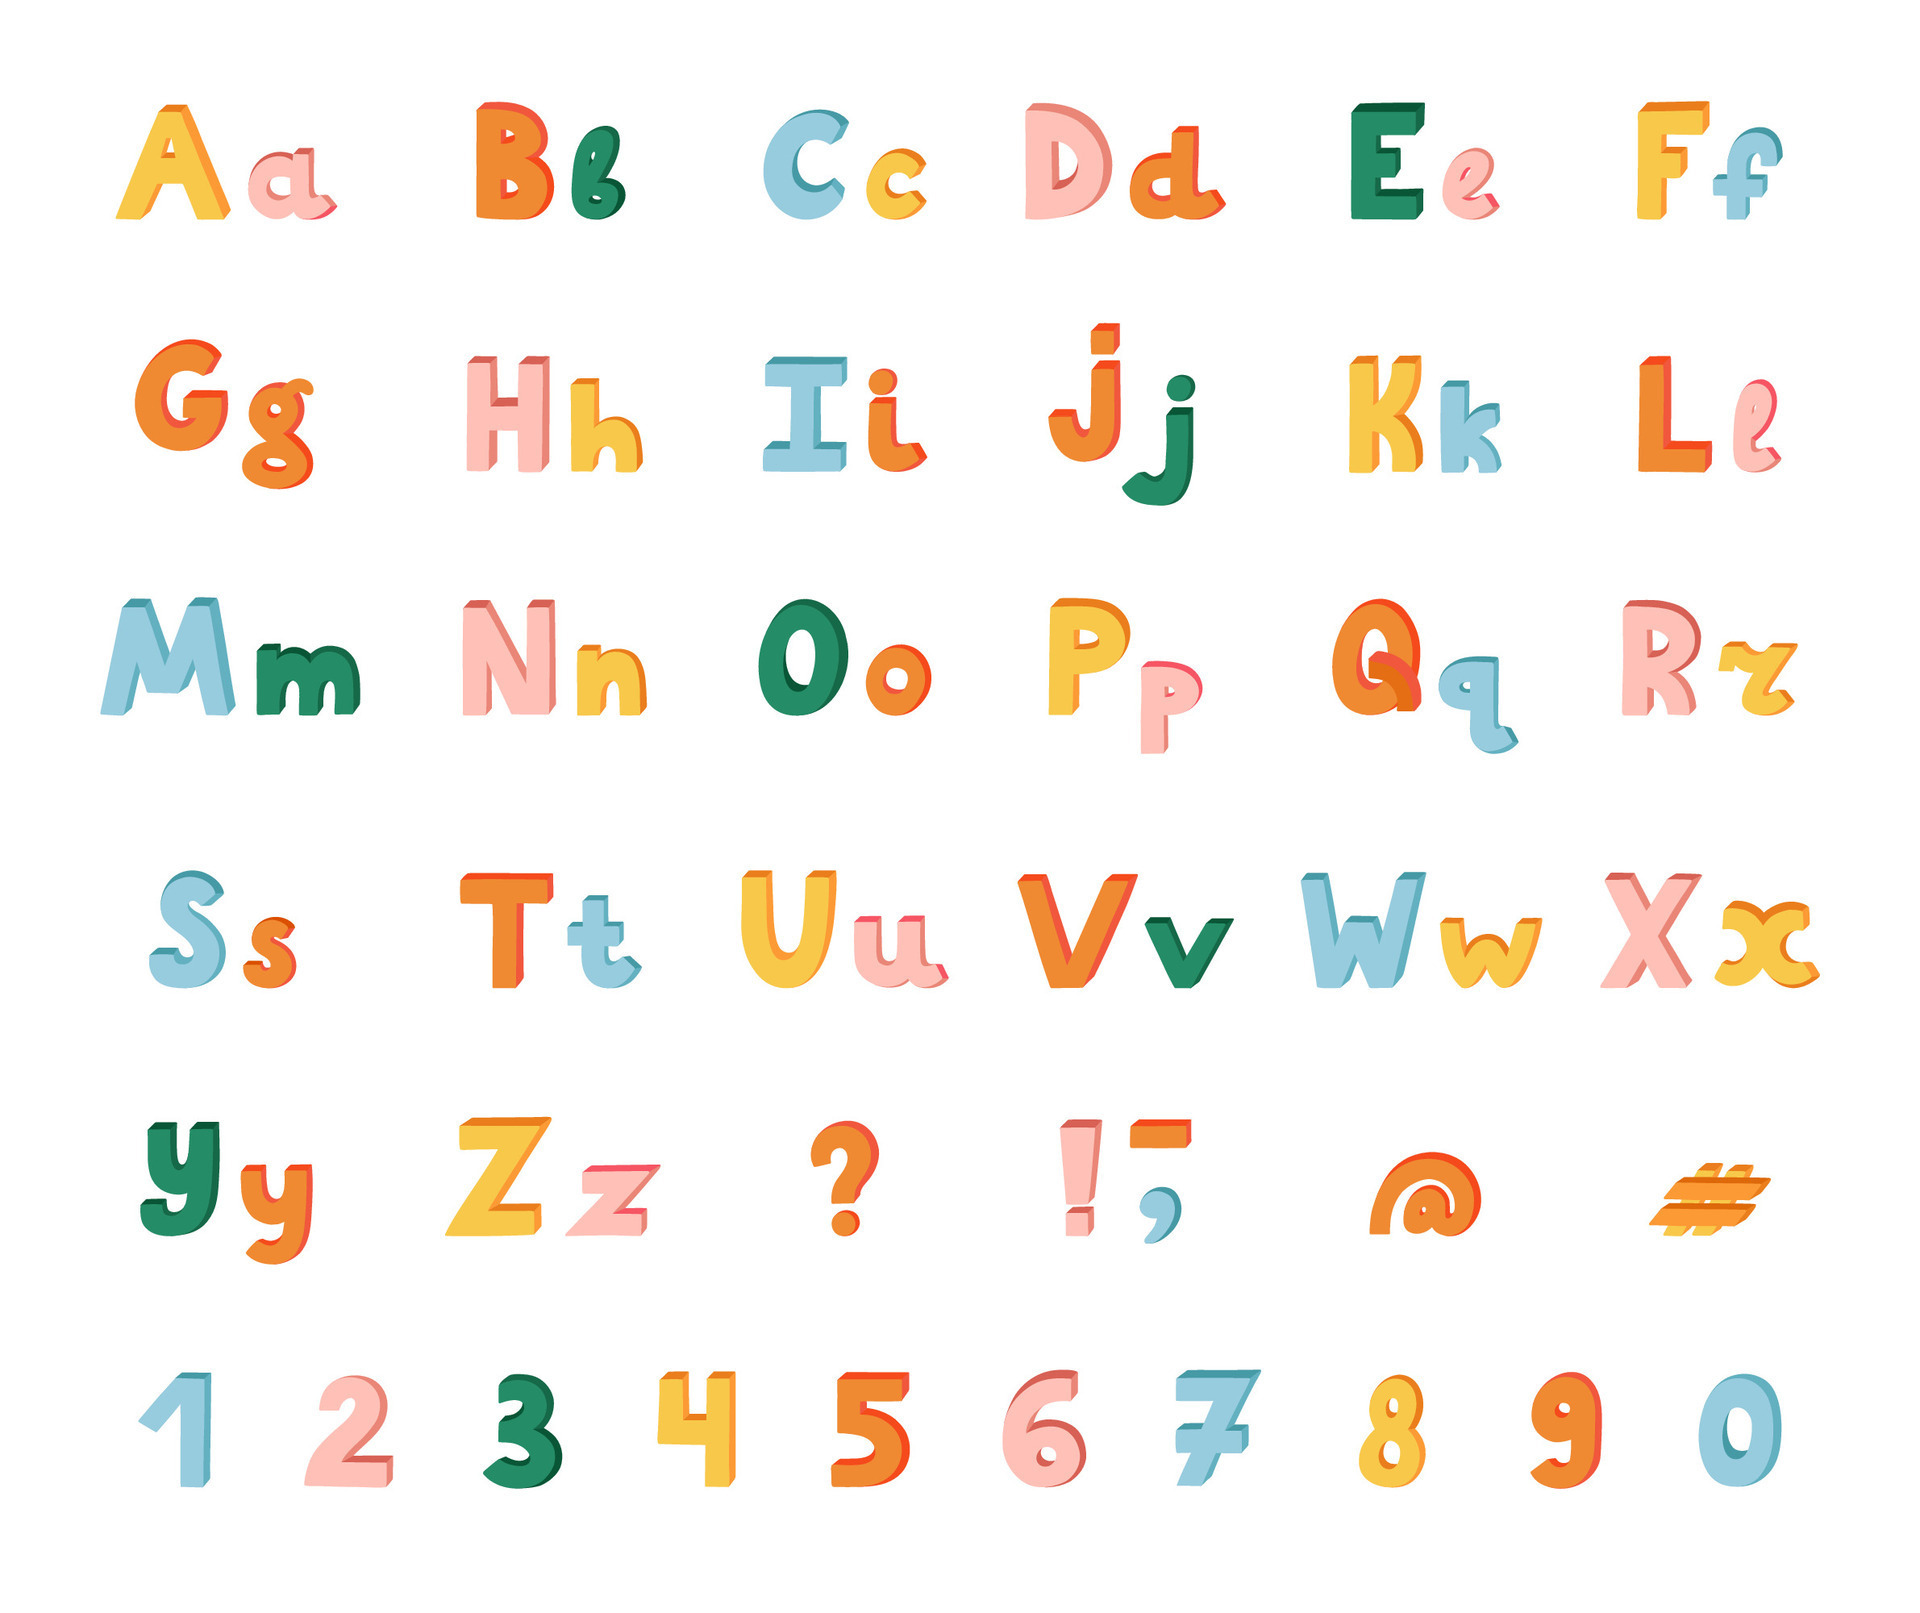 https://static.vecteezy.com/system/resources/previews/035/099/954/original/cute-funky-3d-alphabet-set-bold-font-with-shadow-funny-latin-abc-with-uppercase-lowercase-letters-punctuation-marks-and-numbers-for-poster-logo-headline-book-cover-printed-quotes-vector.jpg